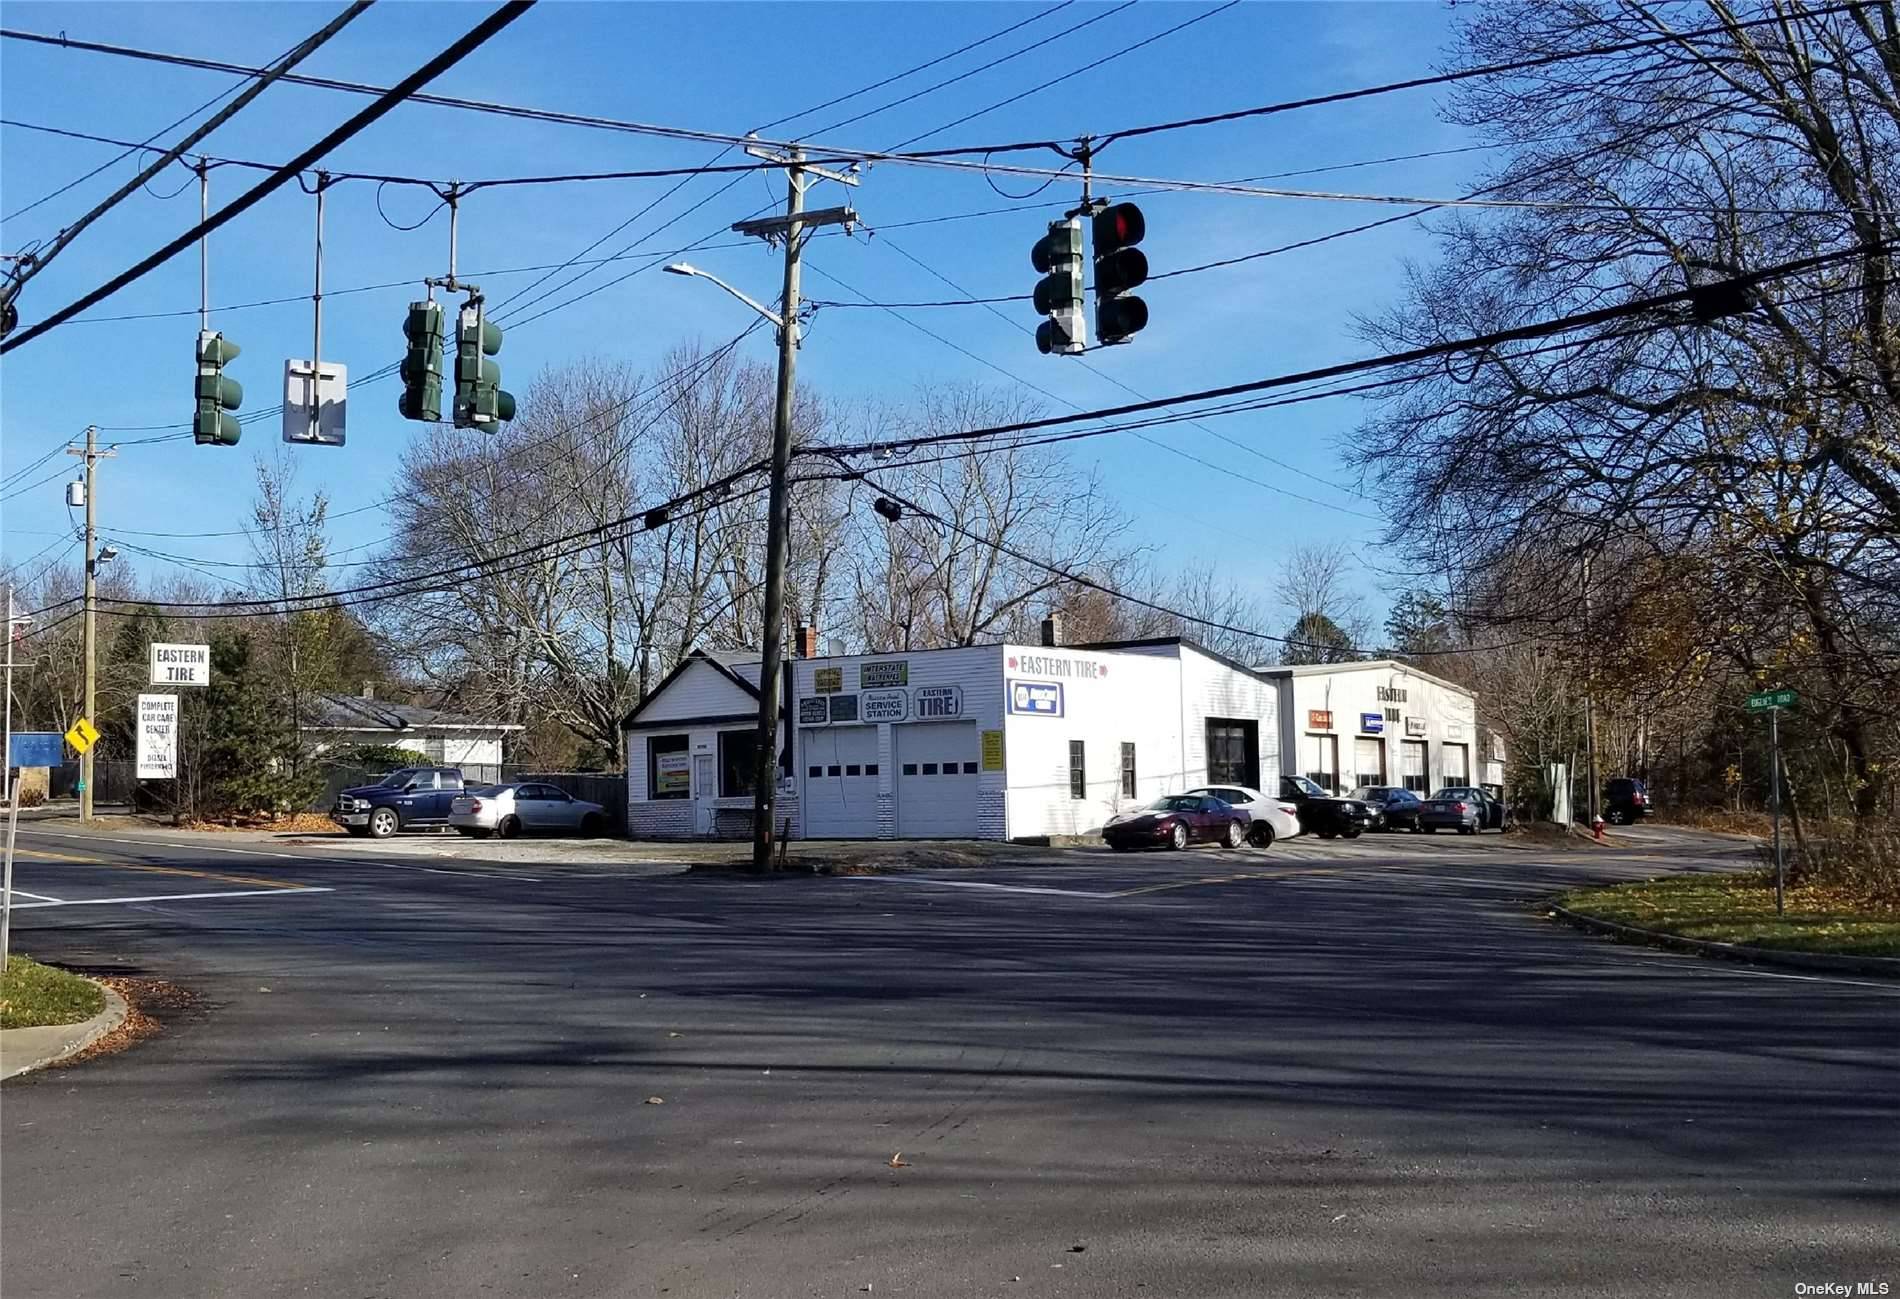 North Fork's premier candidate for redevelopment, featuring prominent visibility at major Main Road intersection regulated by traffic signal.